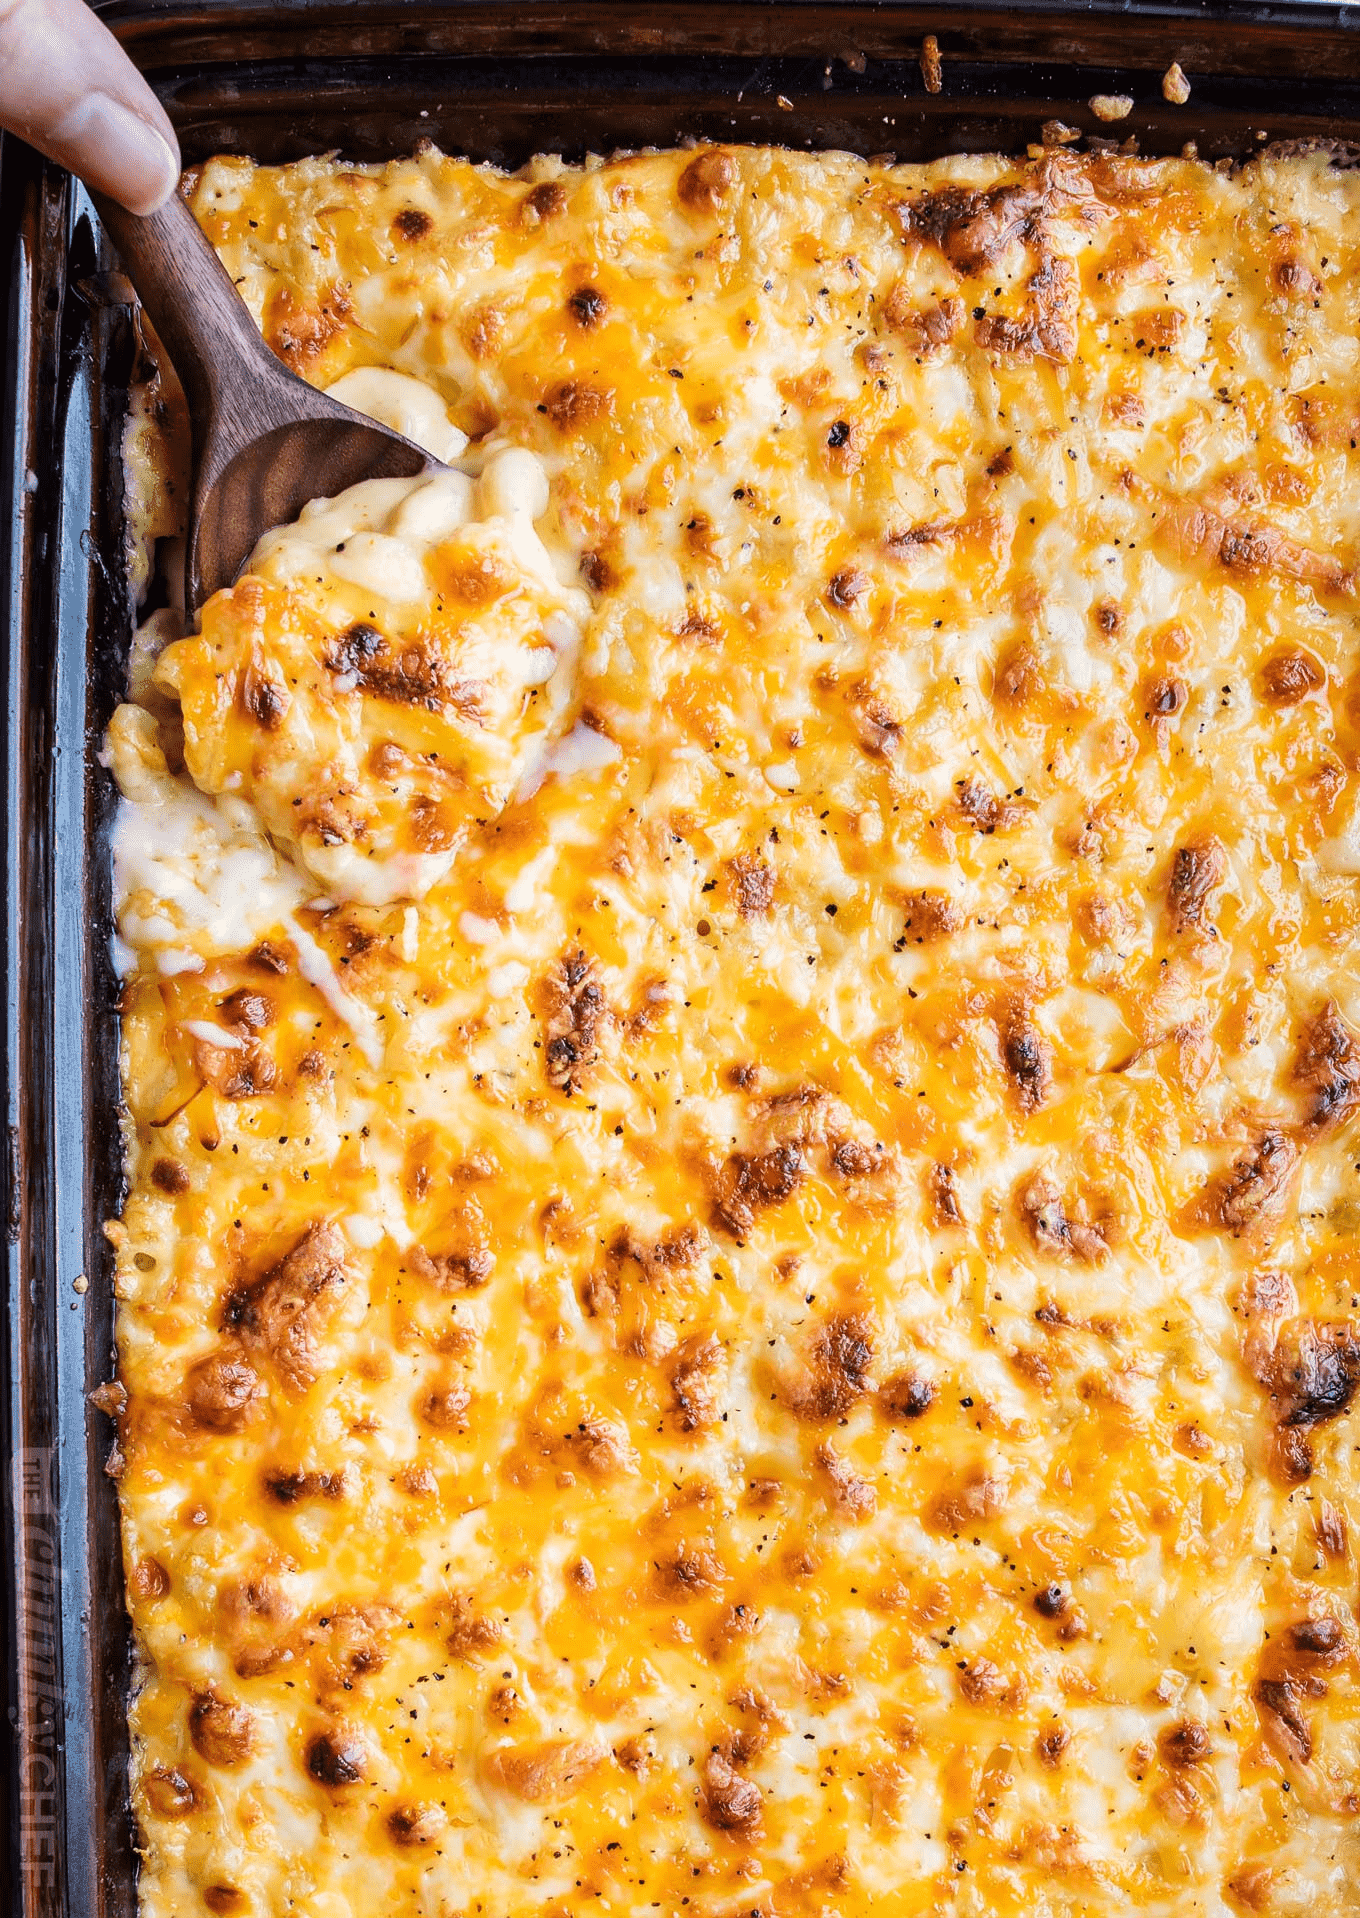 tray of baked macaroni and cheese